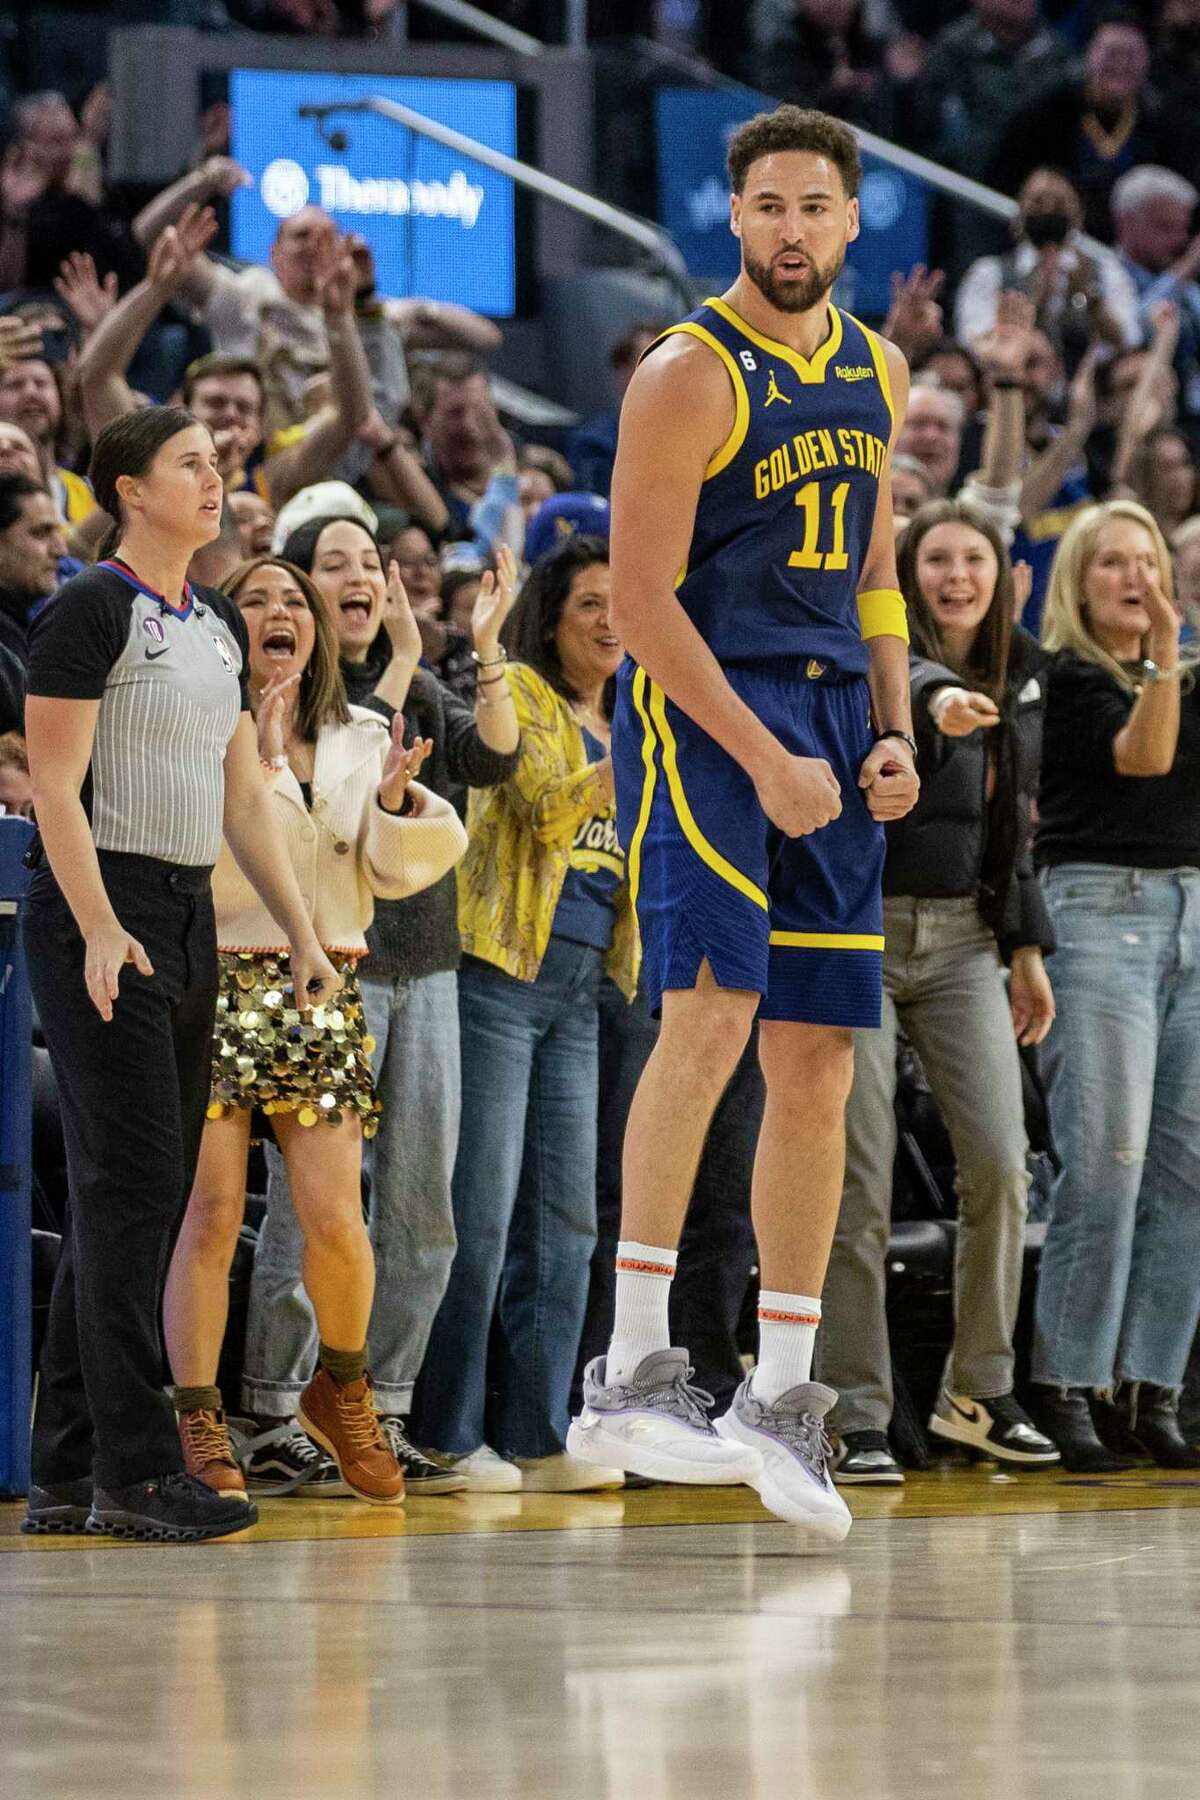 Golden State Warriors guard Klay Thompson (11) reacts after making a three point shot during the fourth quarter of his NBA basketball game against the Minnesota Timberwolves in San Francisco, Calif. Sunday, Feb. 26, 2023. The Warriors defeated the Timberwolves 109-104.